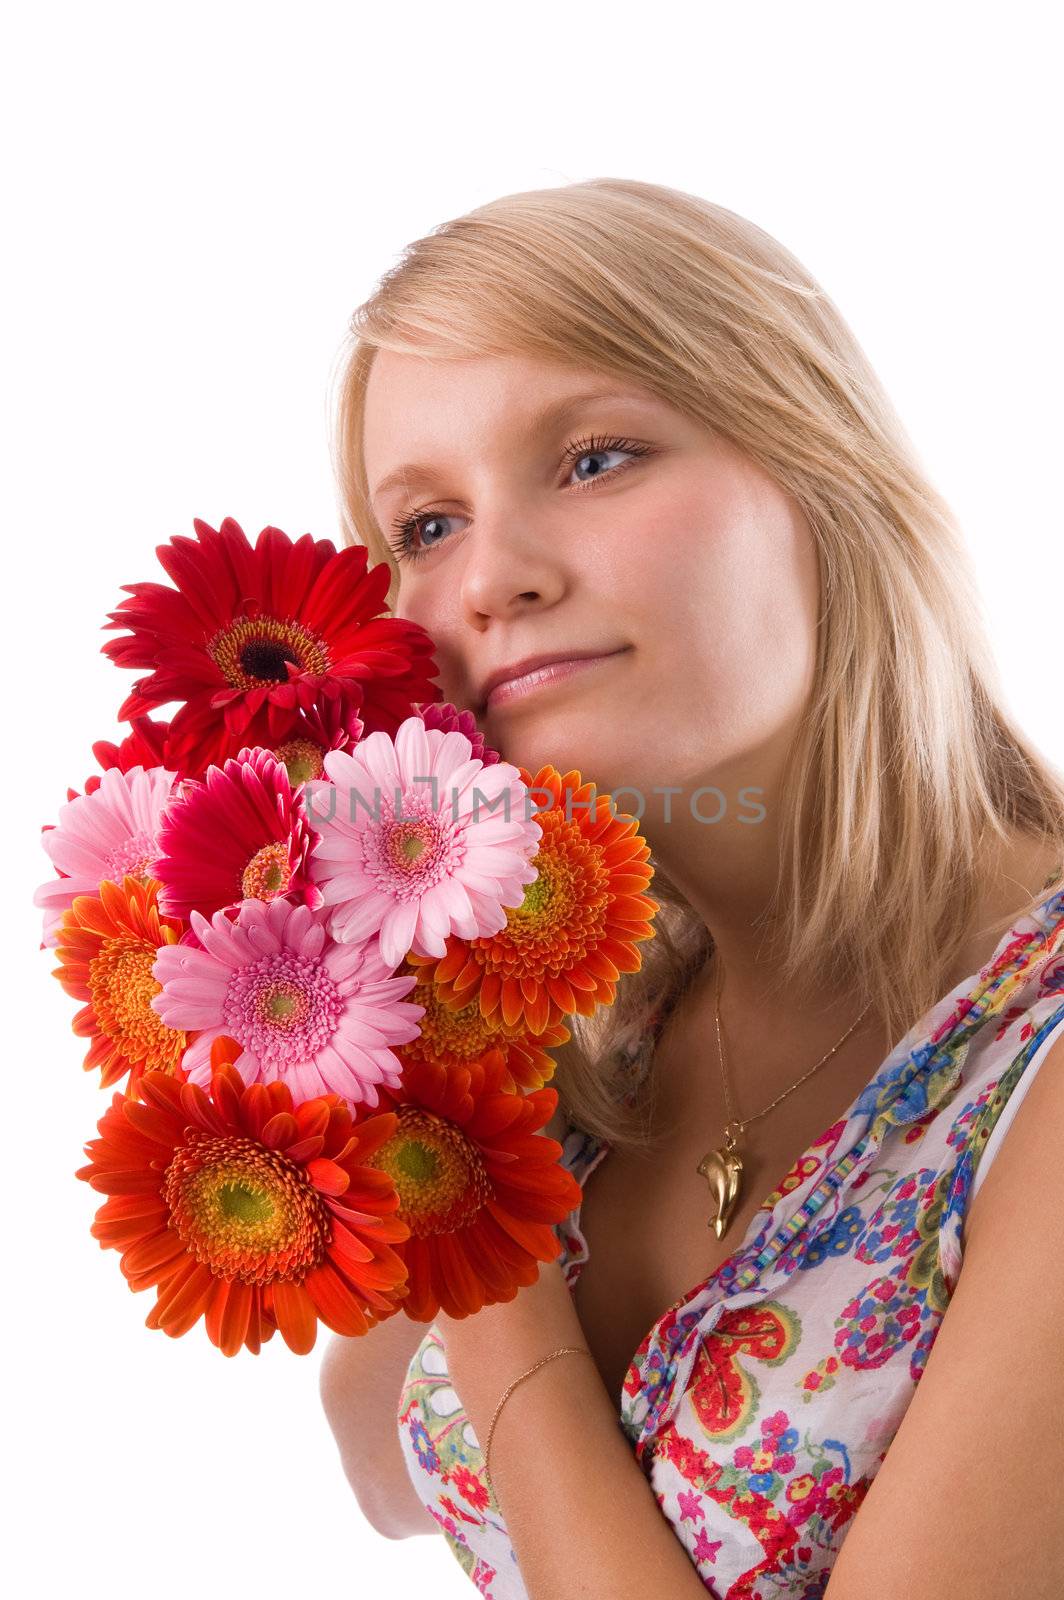 The beautiful blonde holds flowers in hands